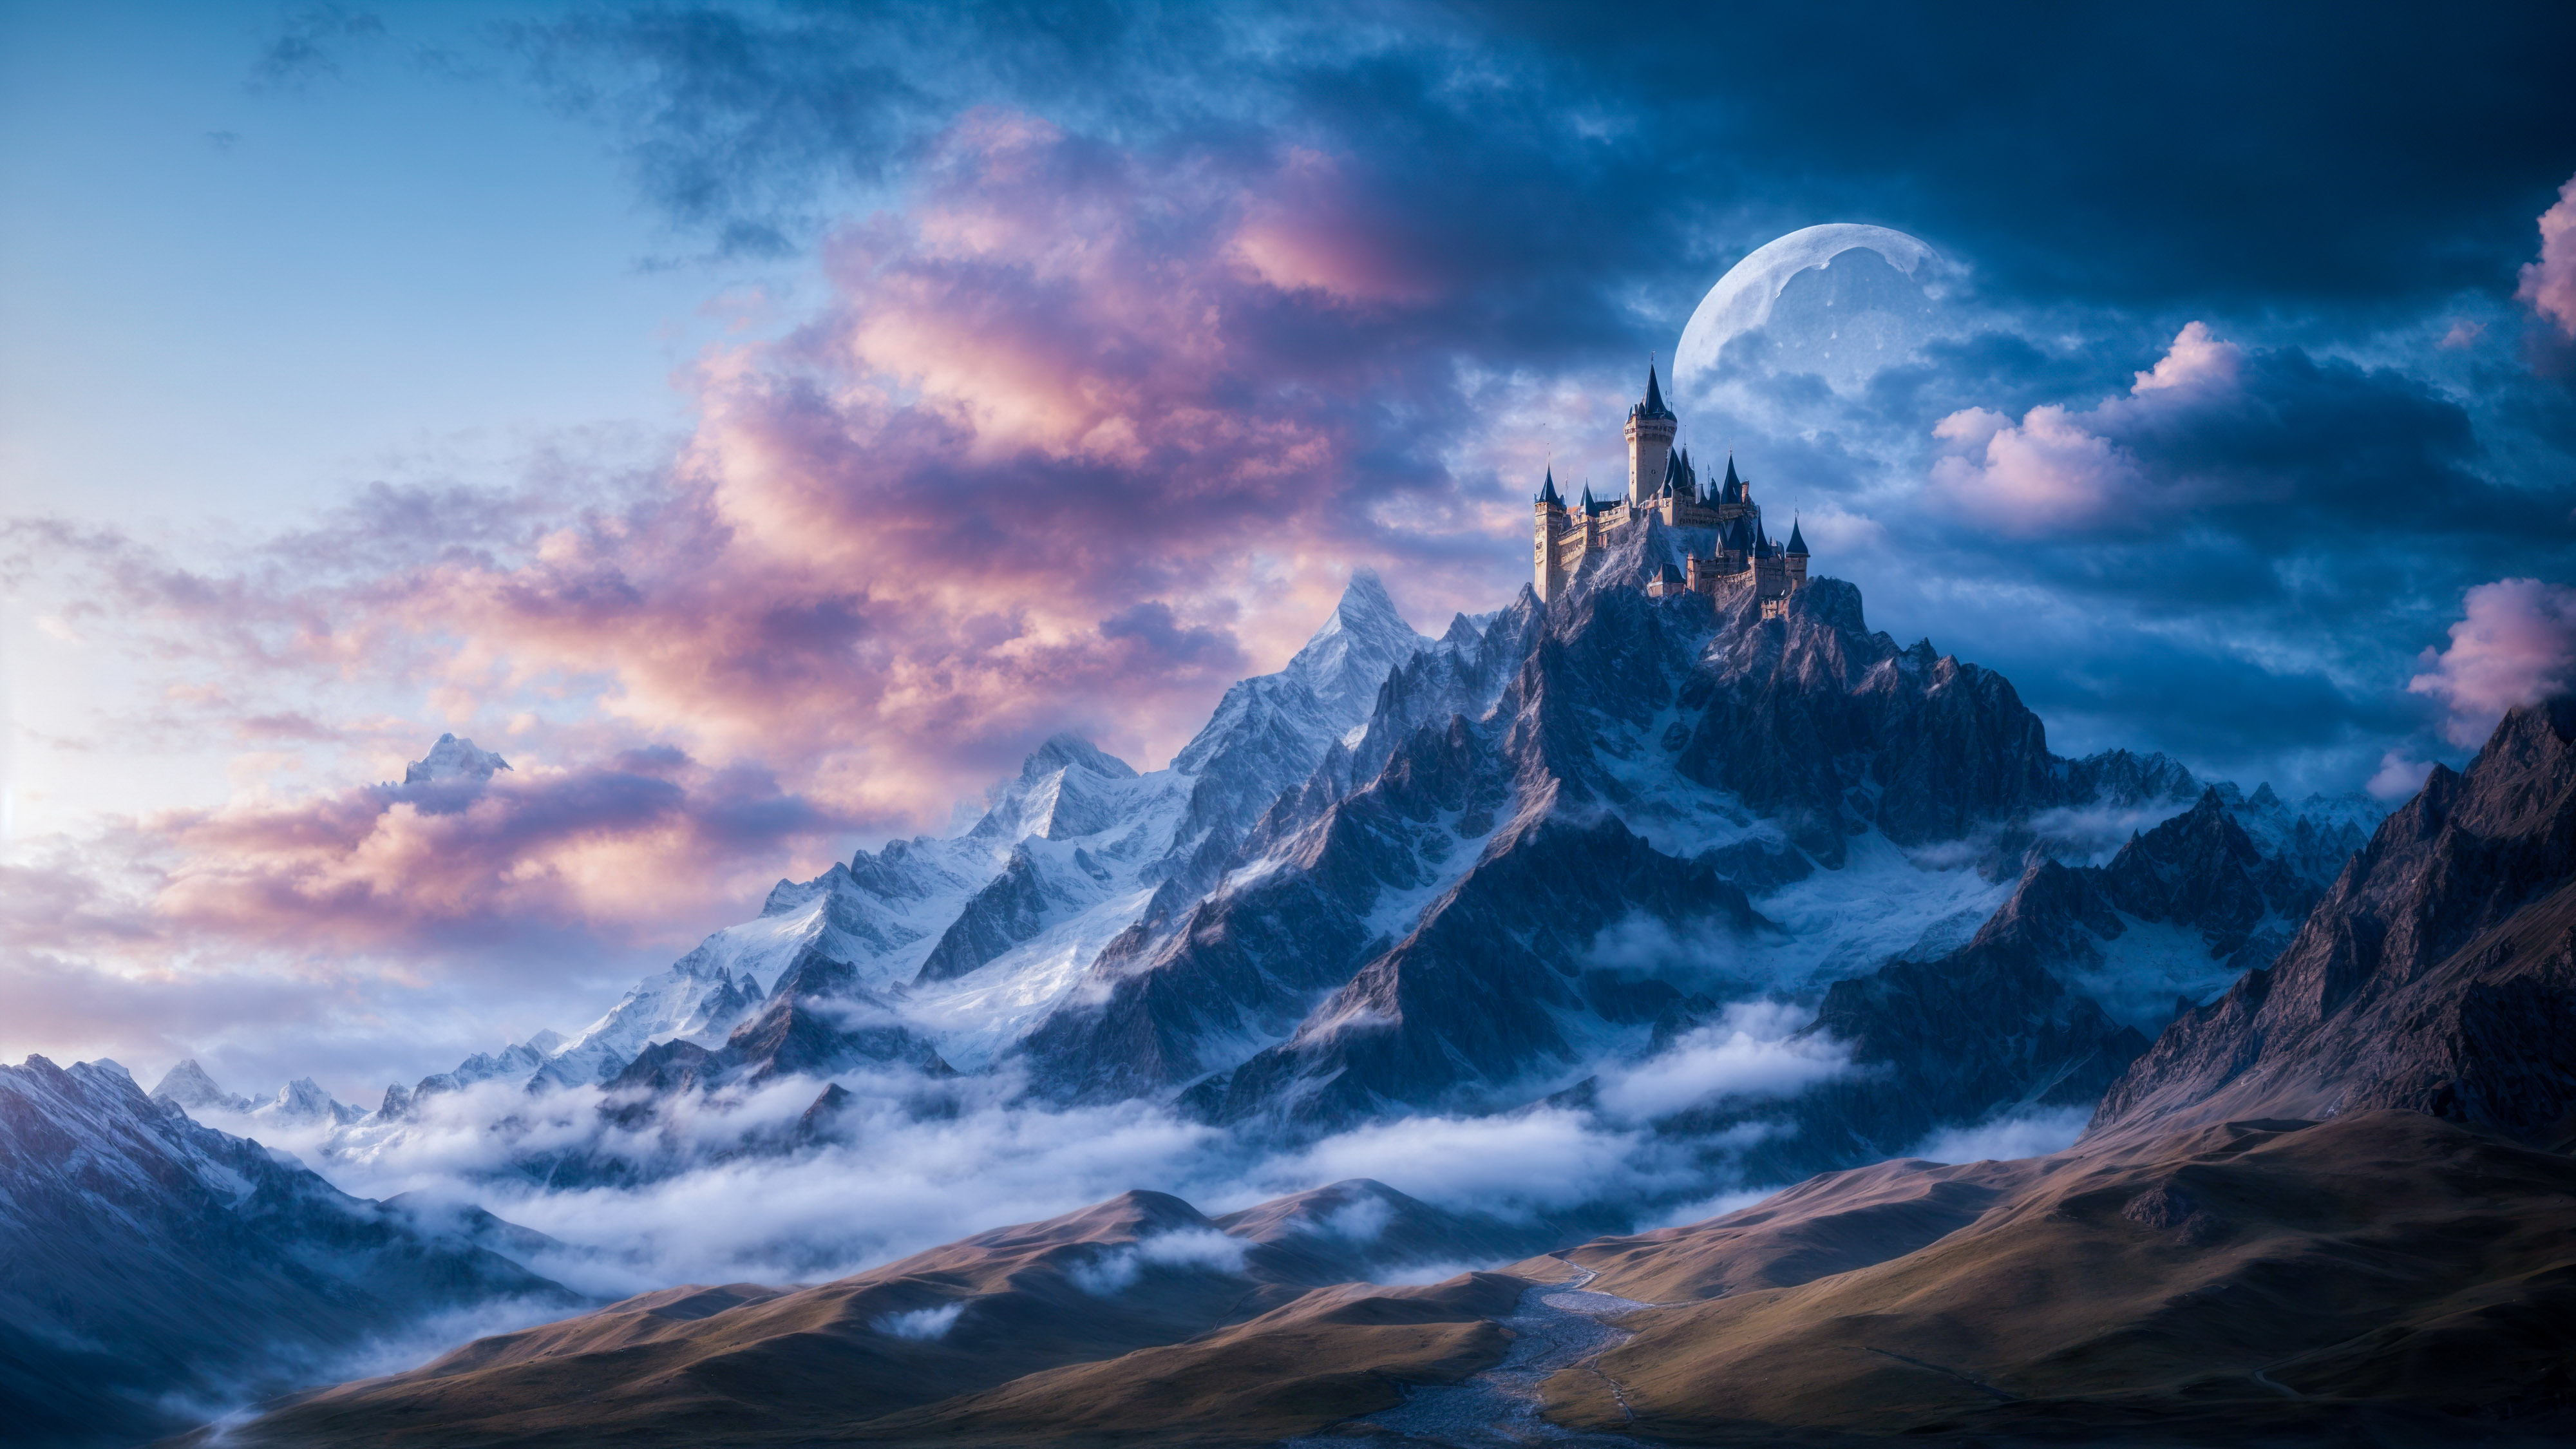 Dive into the world of fantasy with our cool wallpaper featuring a mountain with a castle and a dragon, set against a magical sky and a moon.